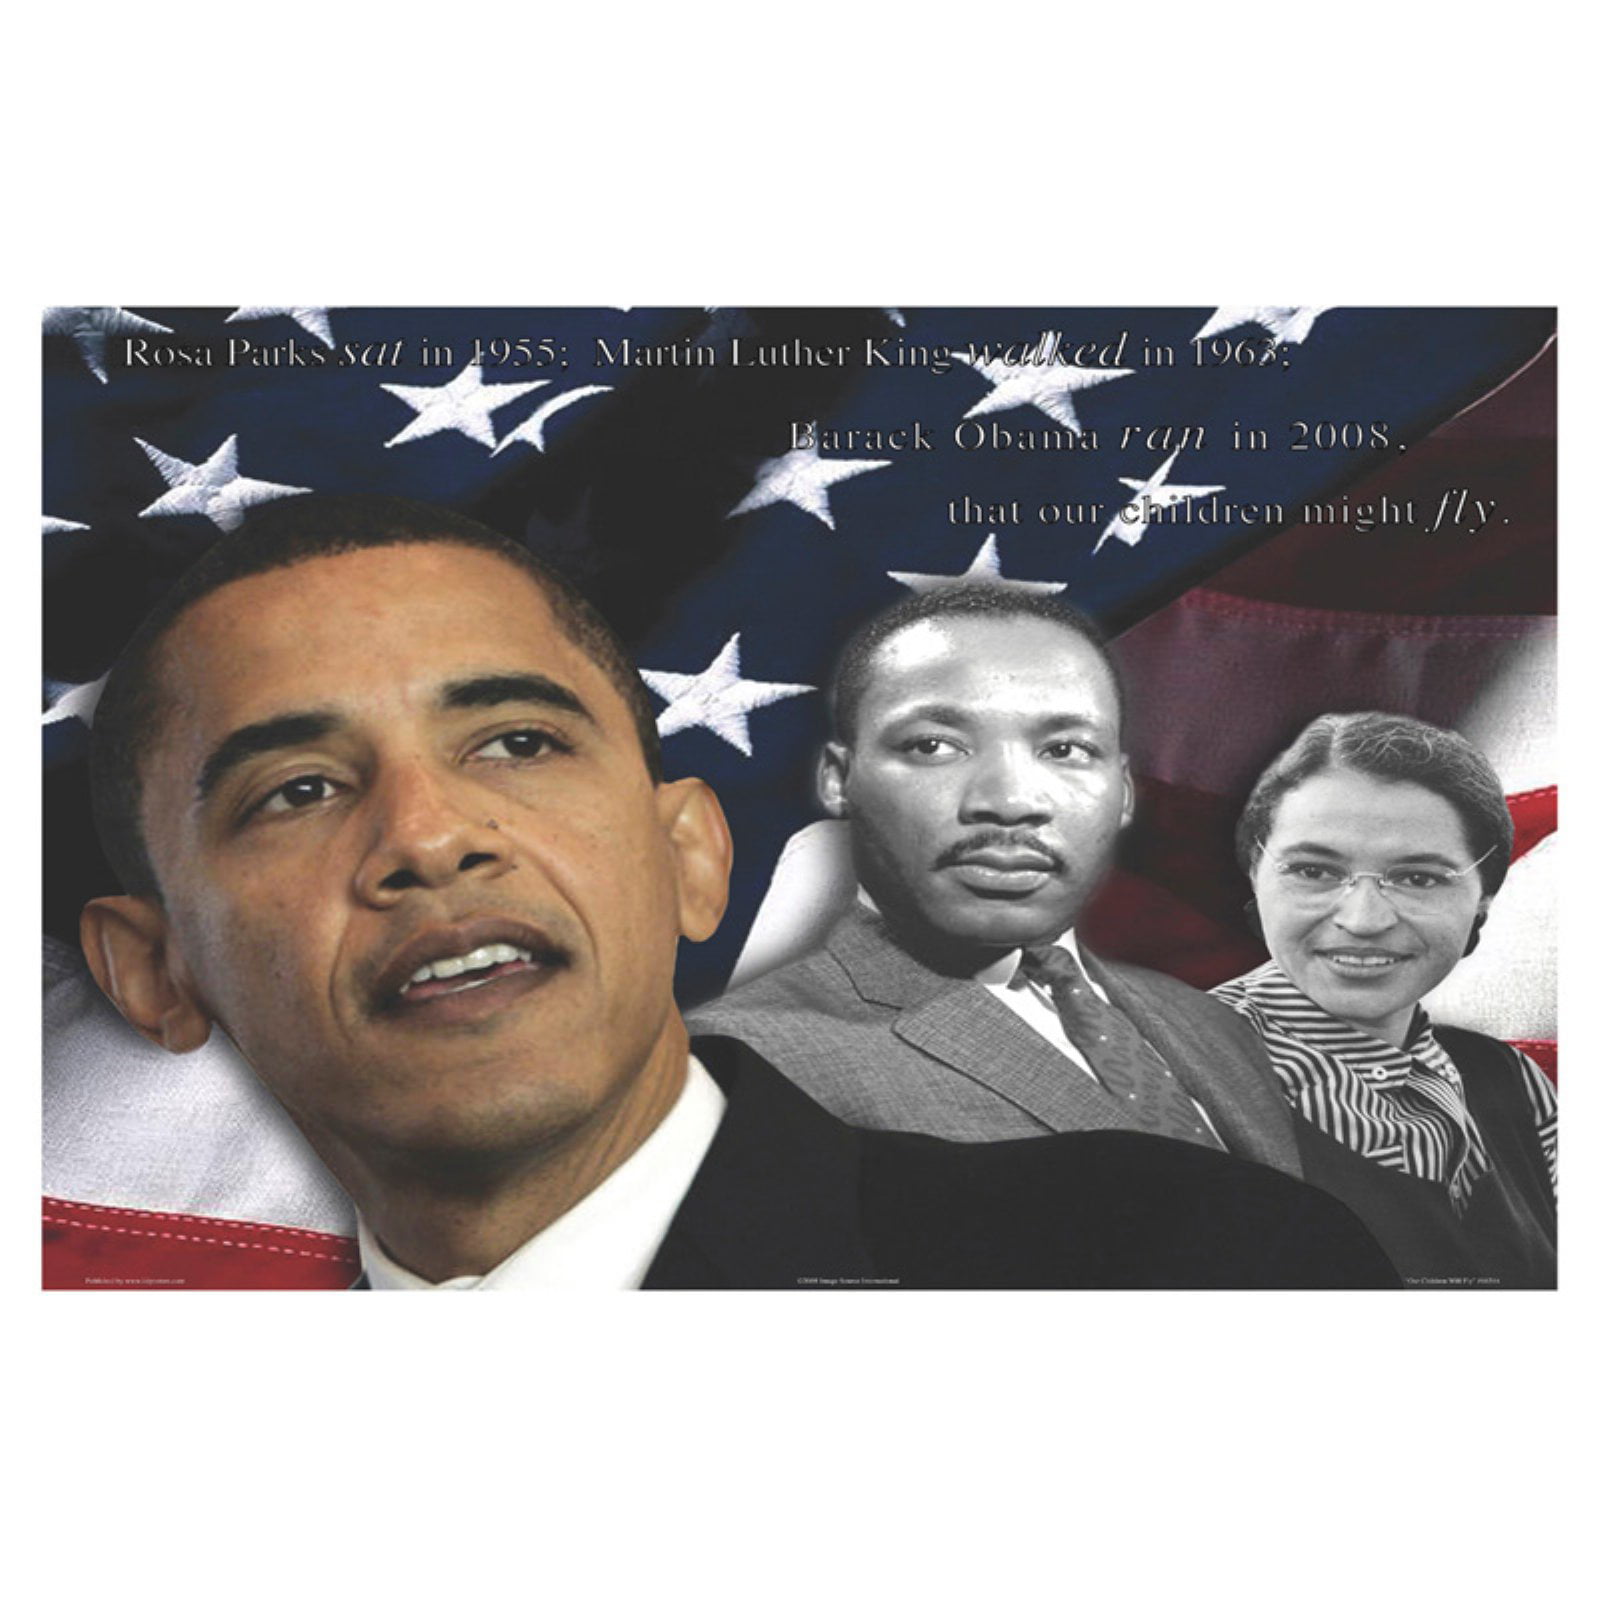 by Zachary Brazdis 14x11 Gallery WRAP Art Print Poster Obama, Martin Luther King and Rosa Parks Buyartforless Canvas Historic Our Children Will Fly 